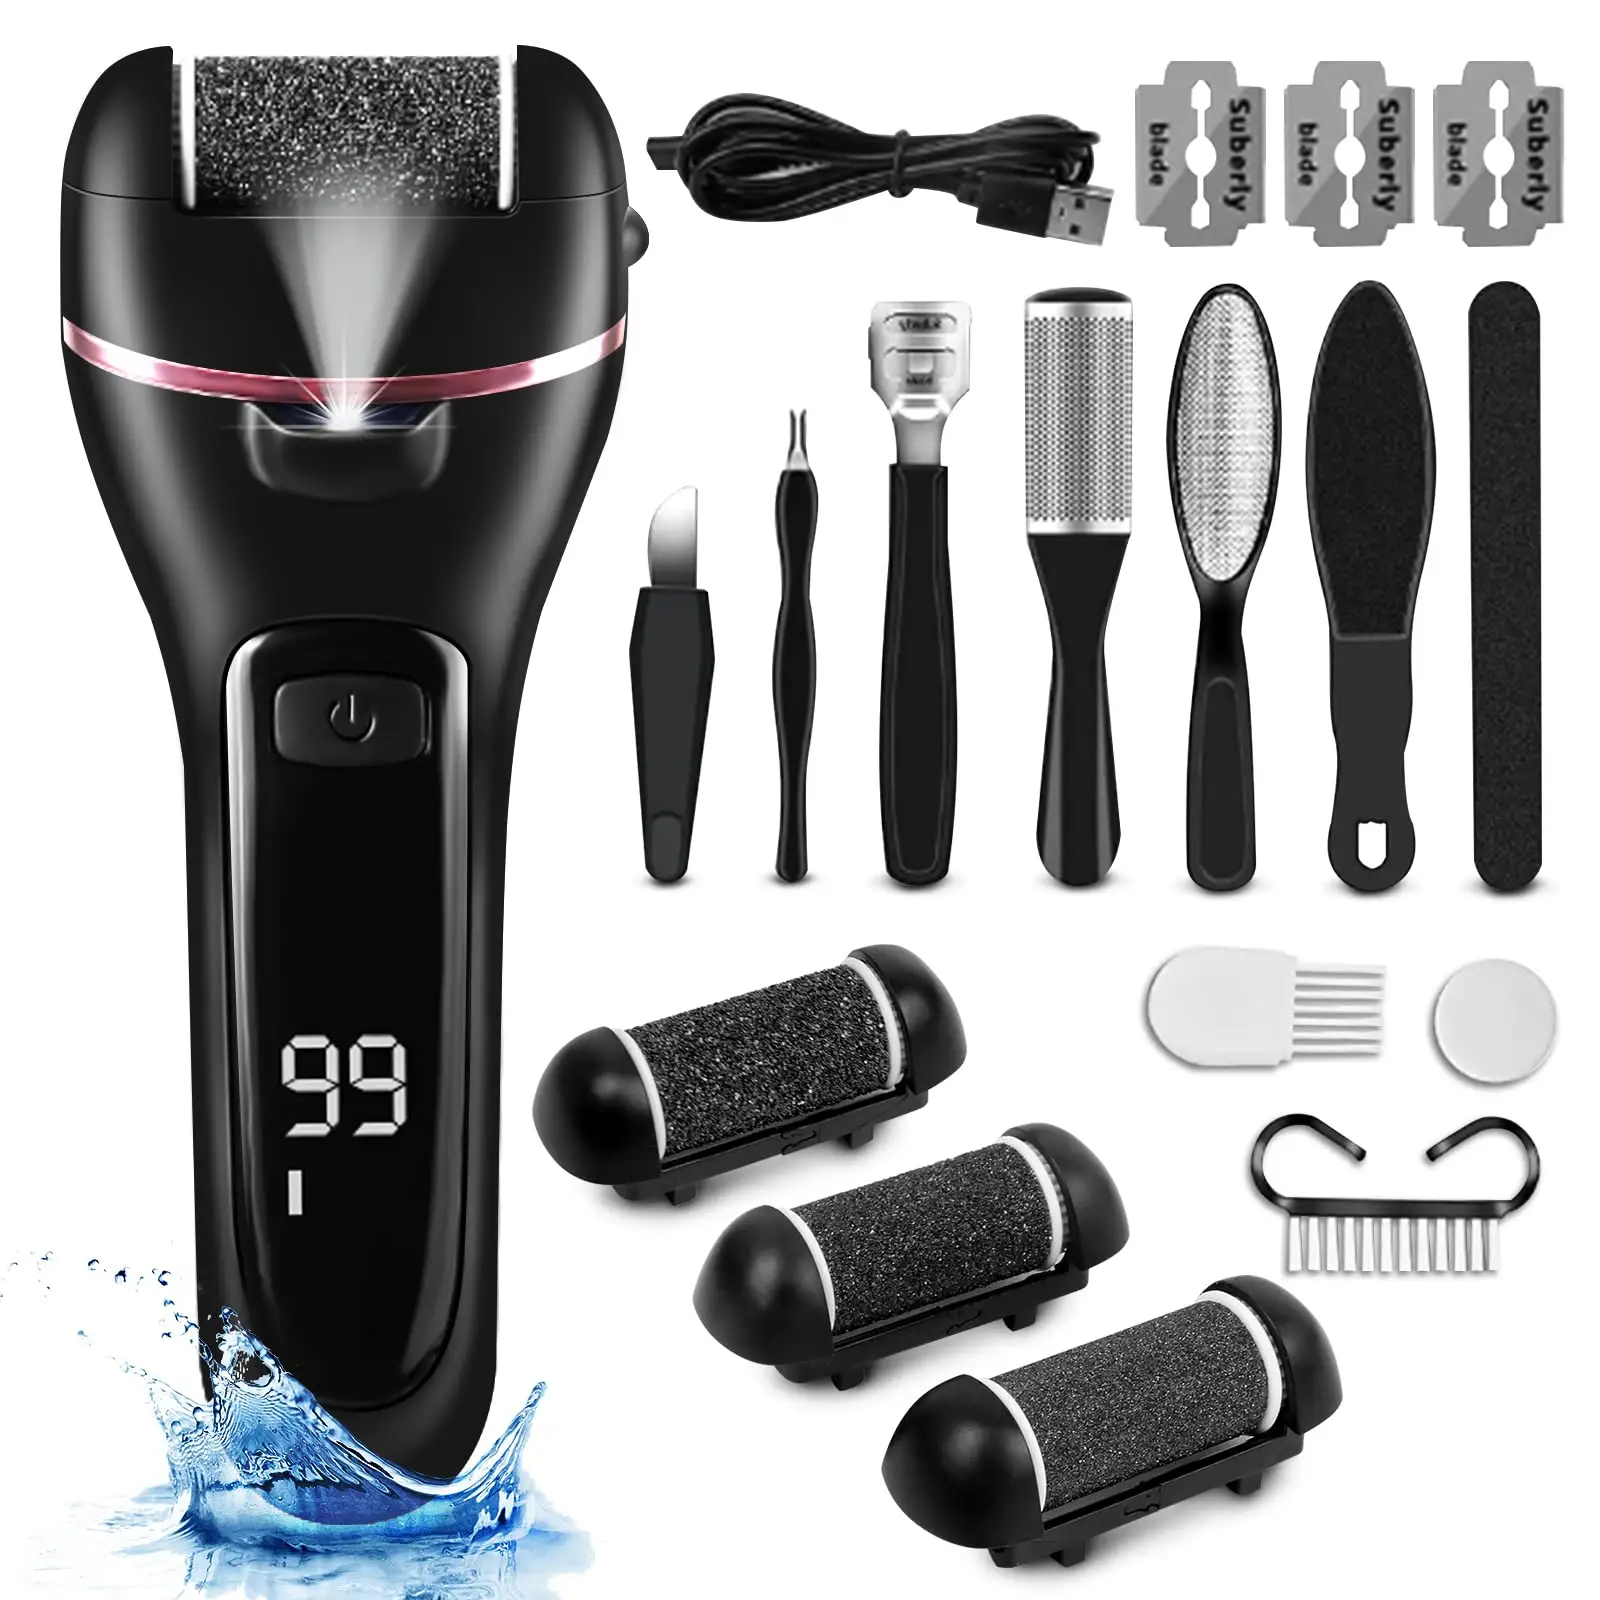 18 in 1 Electric Callus Remover Rechargeable Foot File Kits Spa Professional Pedicure Foot Care Tool